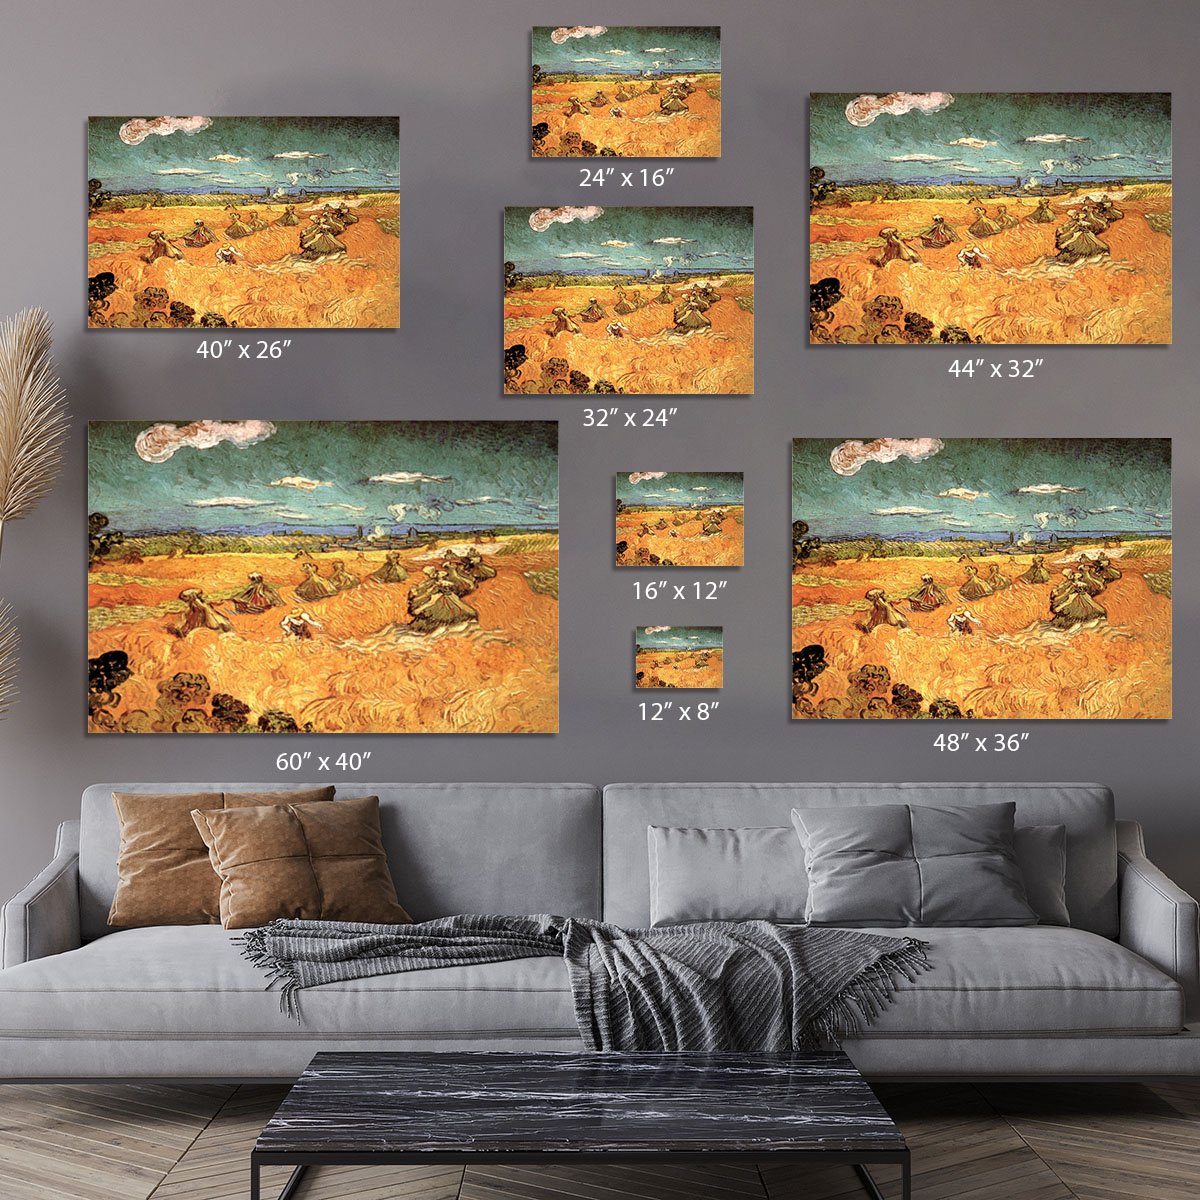 Wheat Stacks with Reaper by Van Gogh Canvas Print or Poster